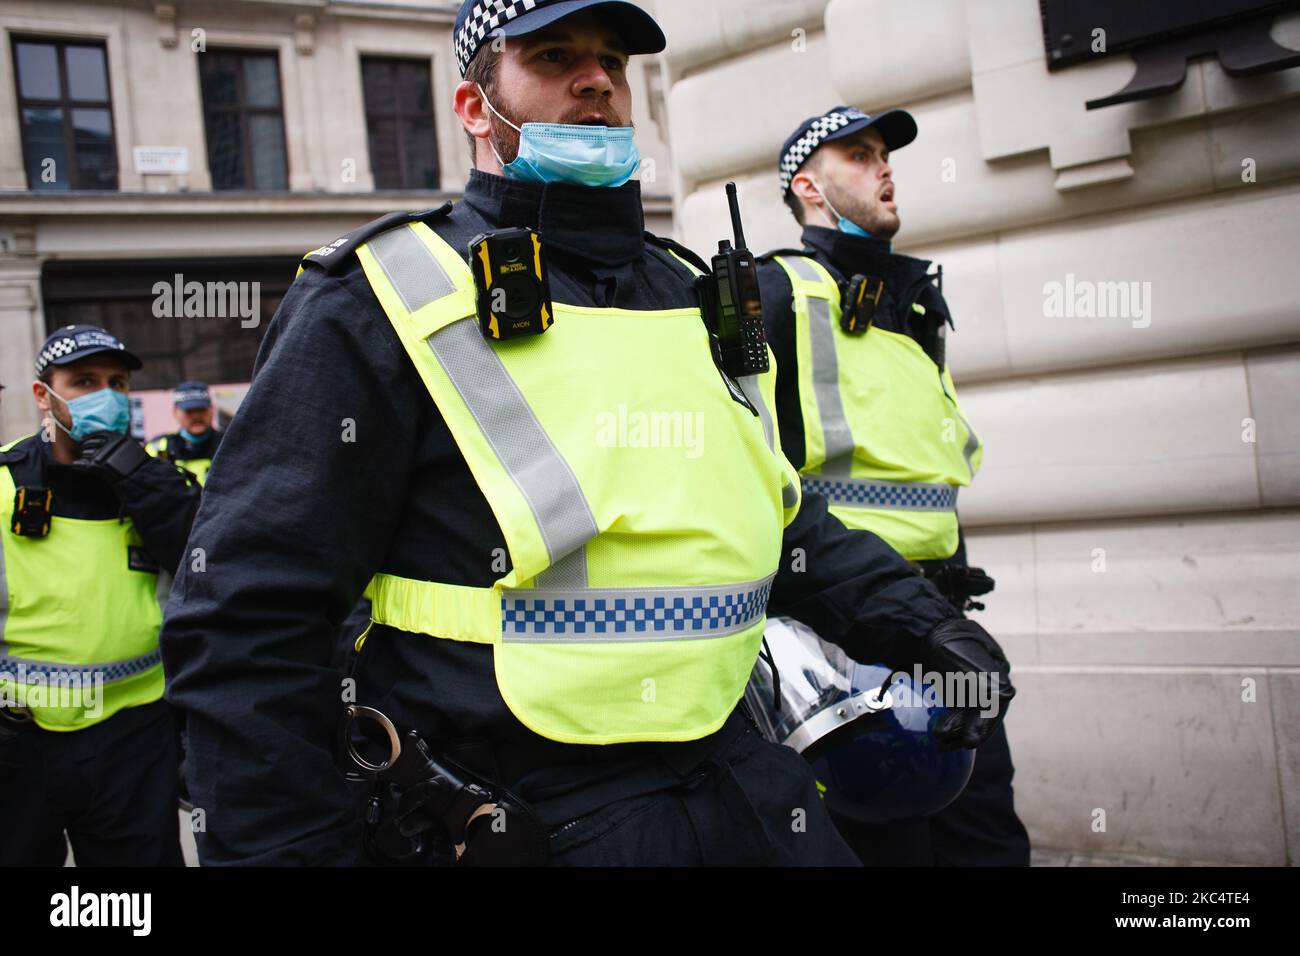 Police officers in riot gear march along Regent Street during an anti-lockdown demonstration in London, England, on November 28, 2020. In an evening update the Metropolitan Police announced it had made 155 arrests over the course of the day's demonstrations, for offences including breaches of coronavirus regulations, assault on police and possession of drugs. London is to return to 'Tier 2' or 'high alert' covid-19 restrictions once the current England-wide coronavirus lockdown ends next Wednesday. All three of the tiers, assigned to local authorities across England, have been strengthened sin Stock Photo